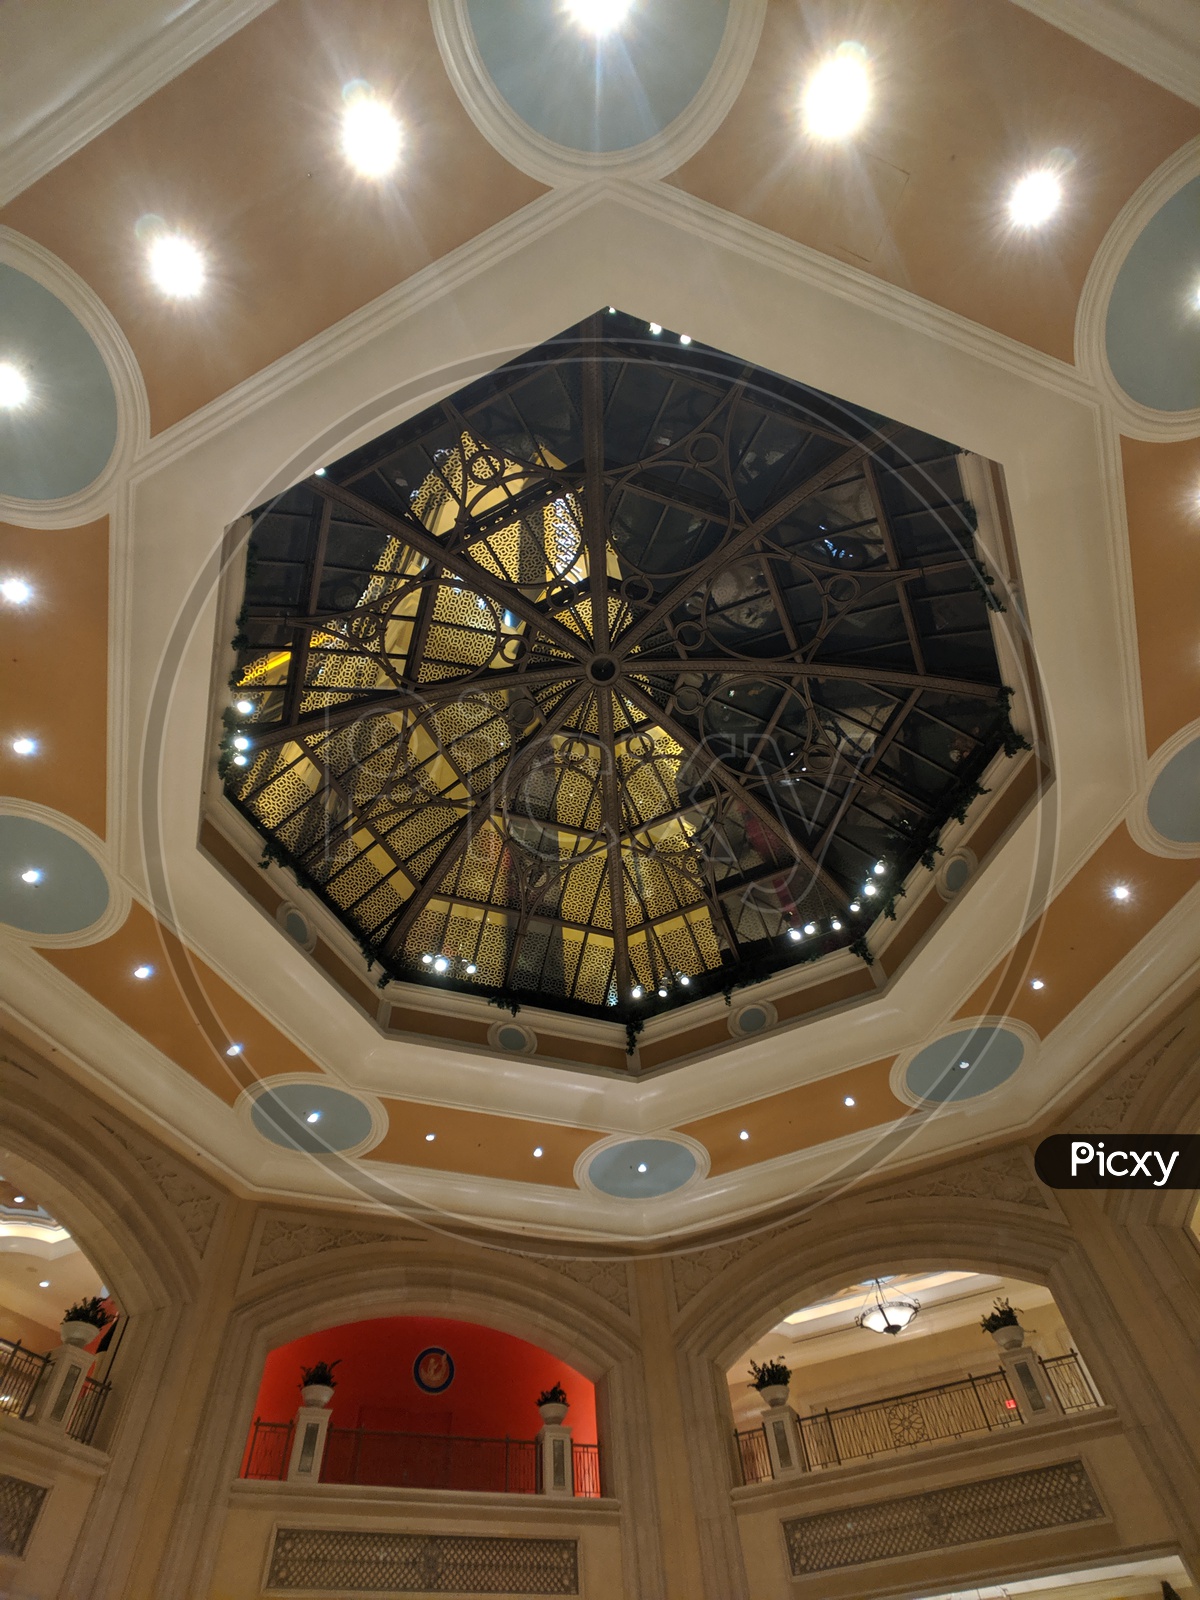 Architecture Of a mall With  Roof Designs